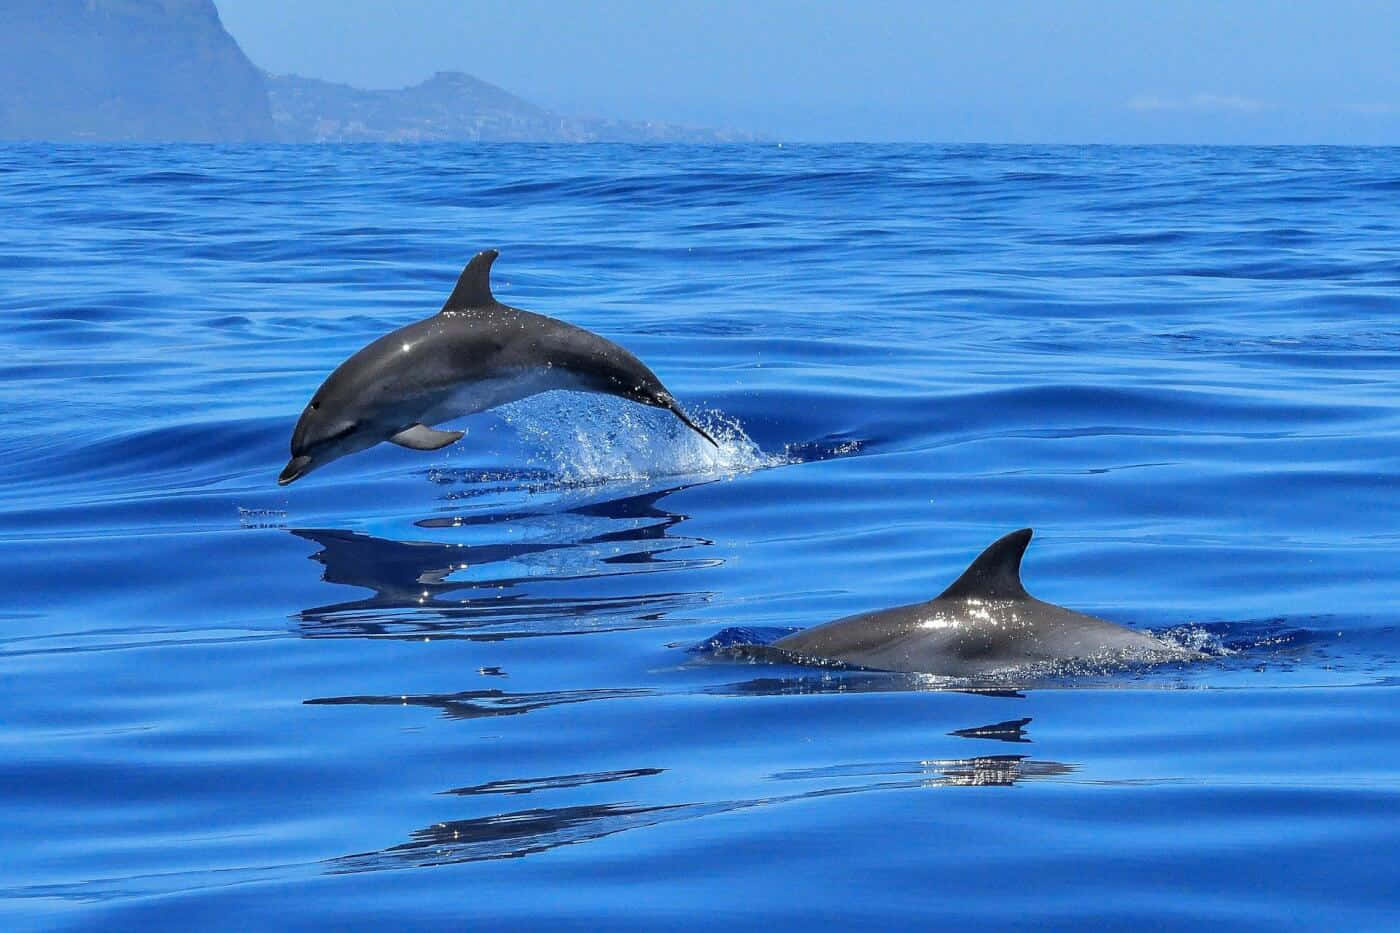 "Playful Dolphins Jumping Up To Catch Some Sun"